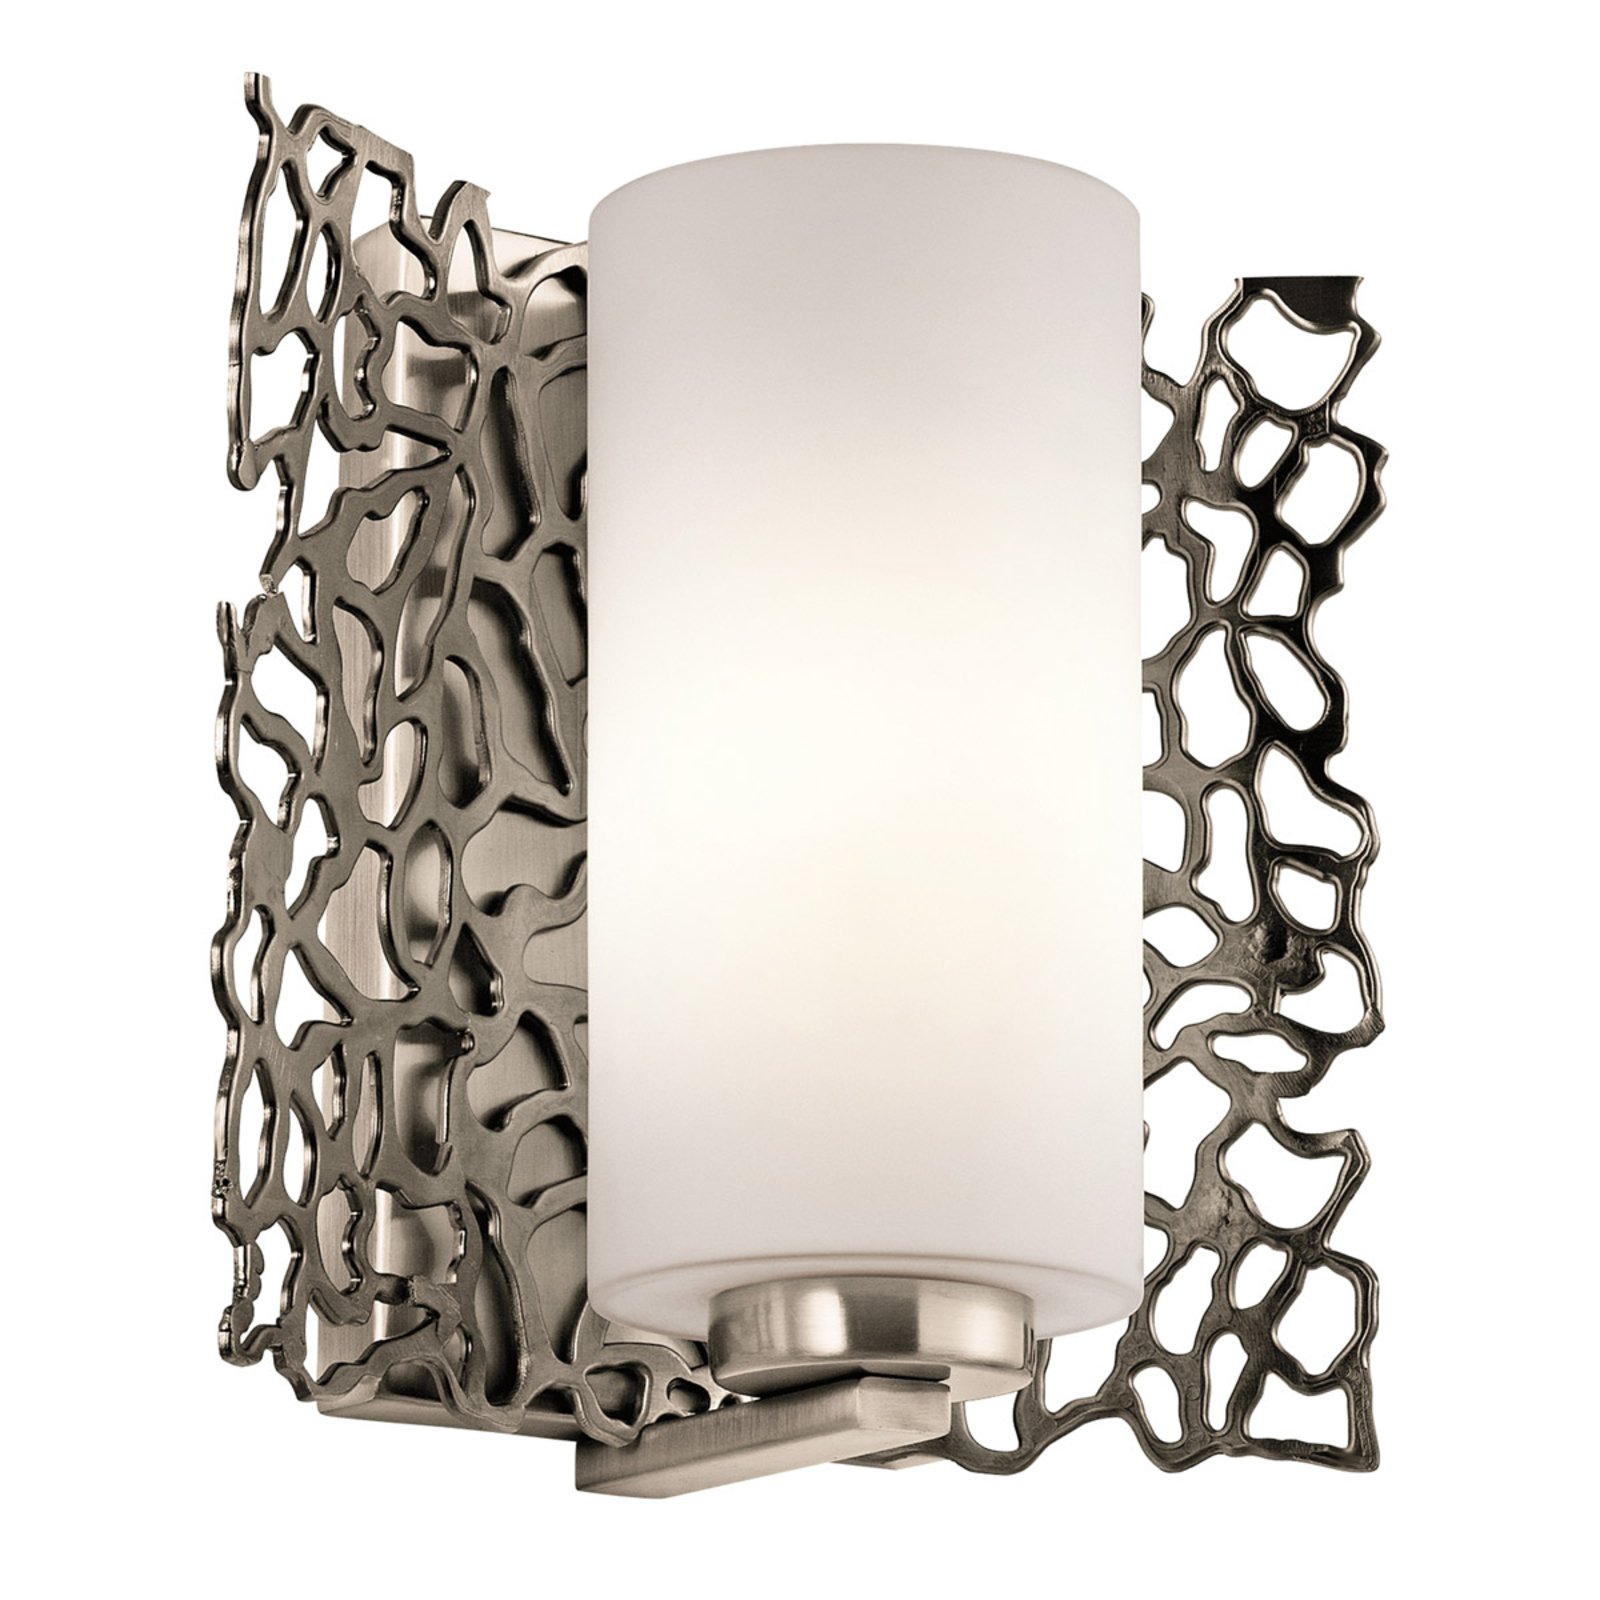 Extravagantly-designed wall light Silver Coral